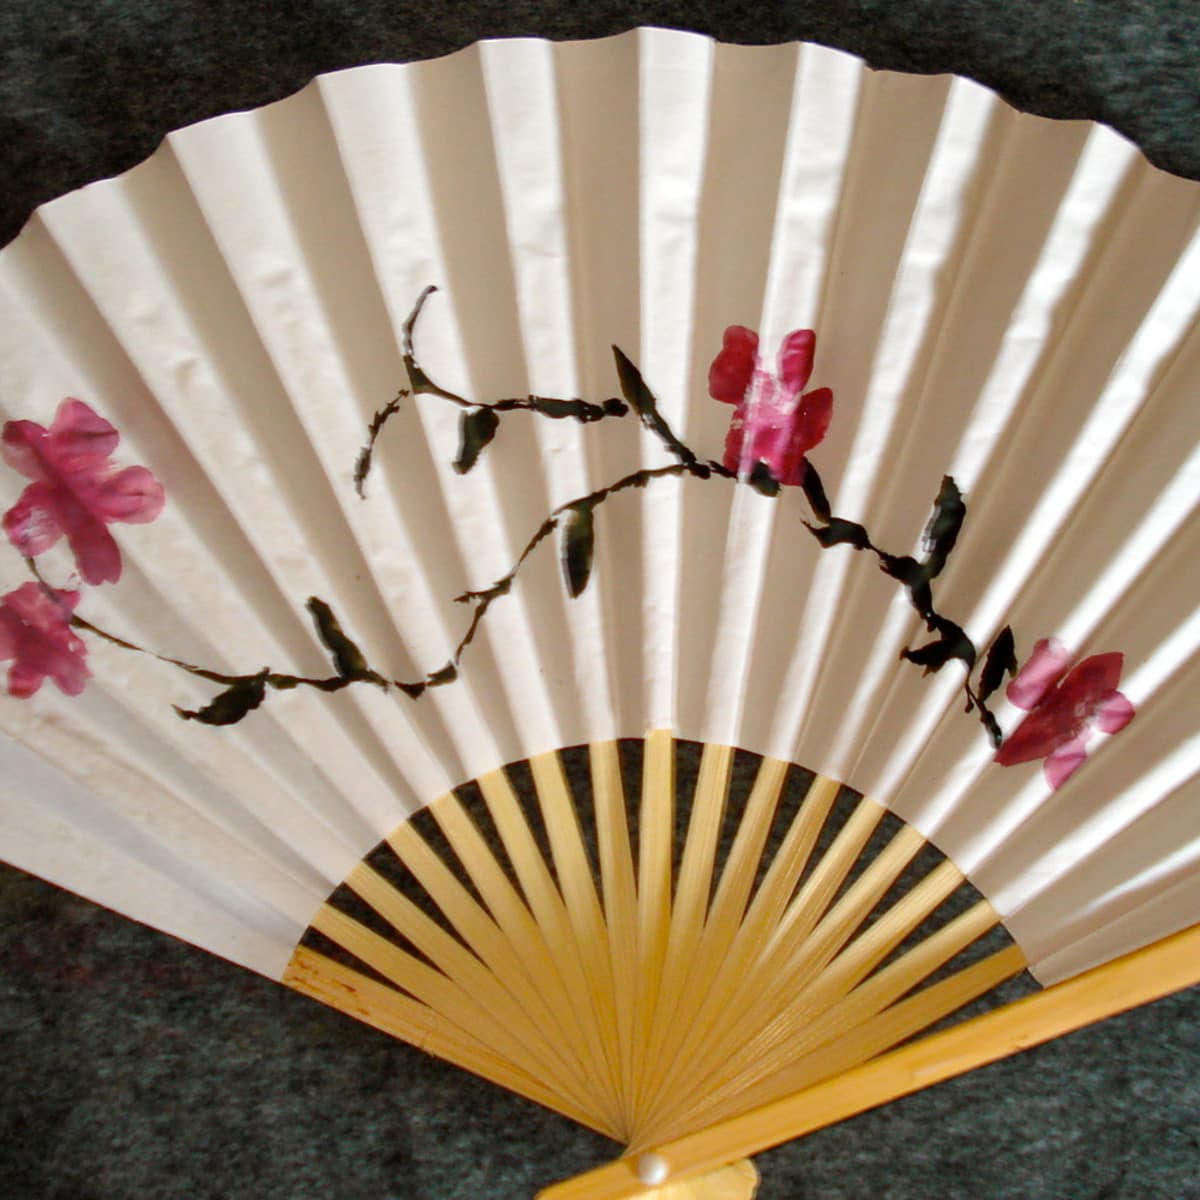 How to Paint a Fan: Instructions and Ideas - FeltMagnet